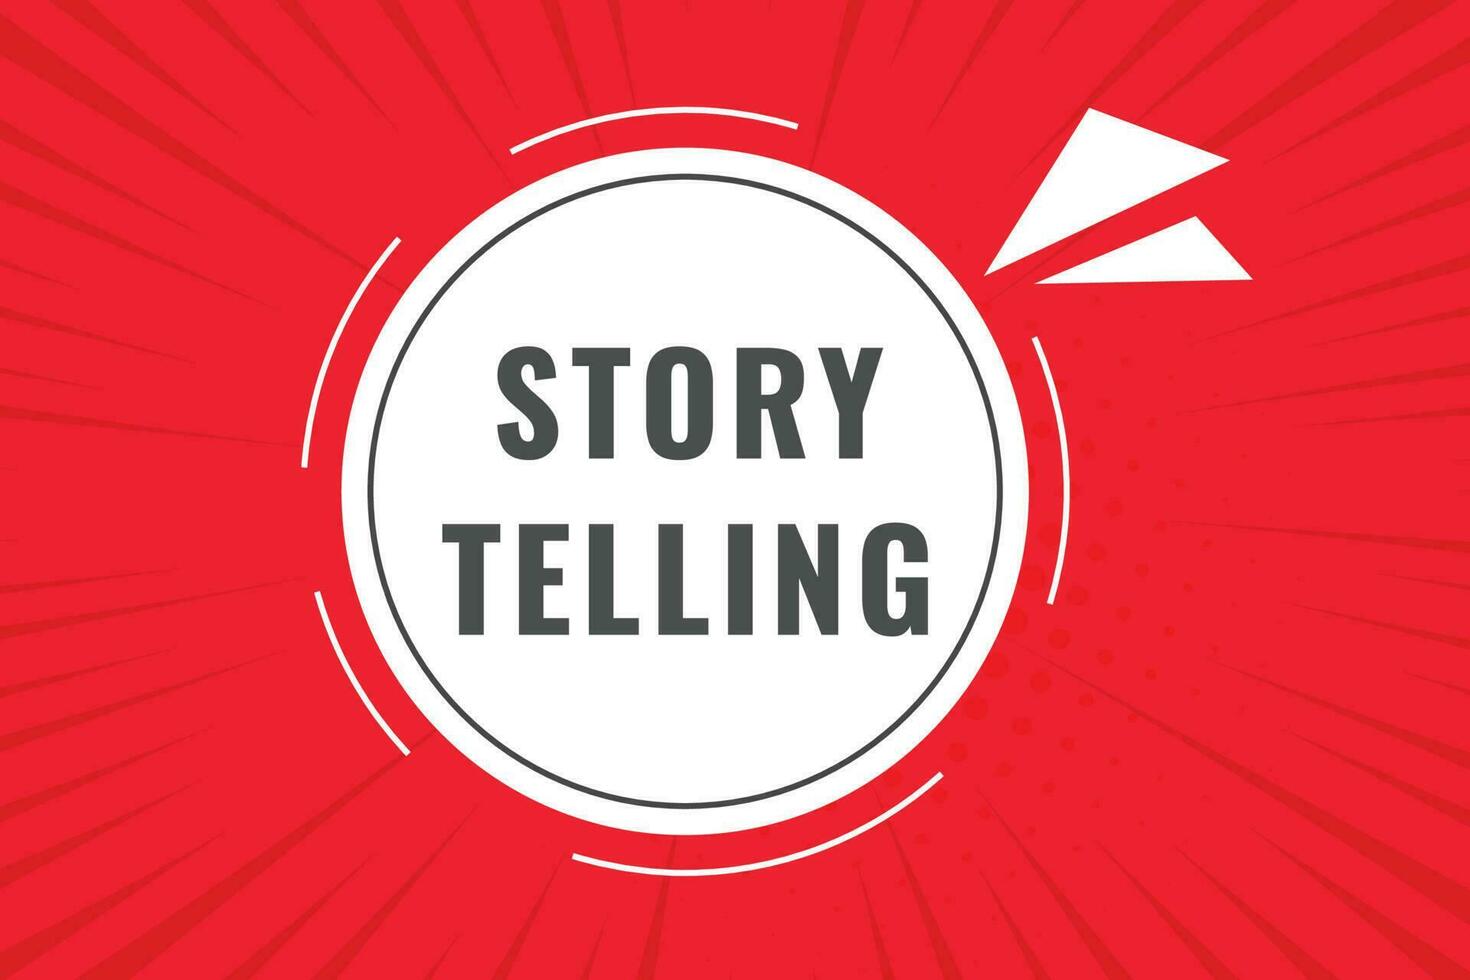 Story Telling Button. Speech Bubble, Banner Label Storytelling vector